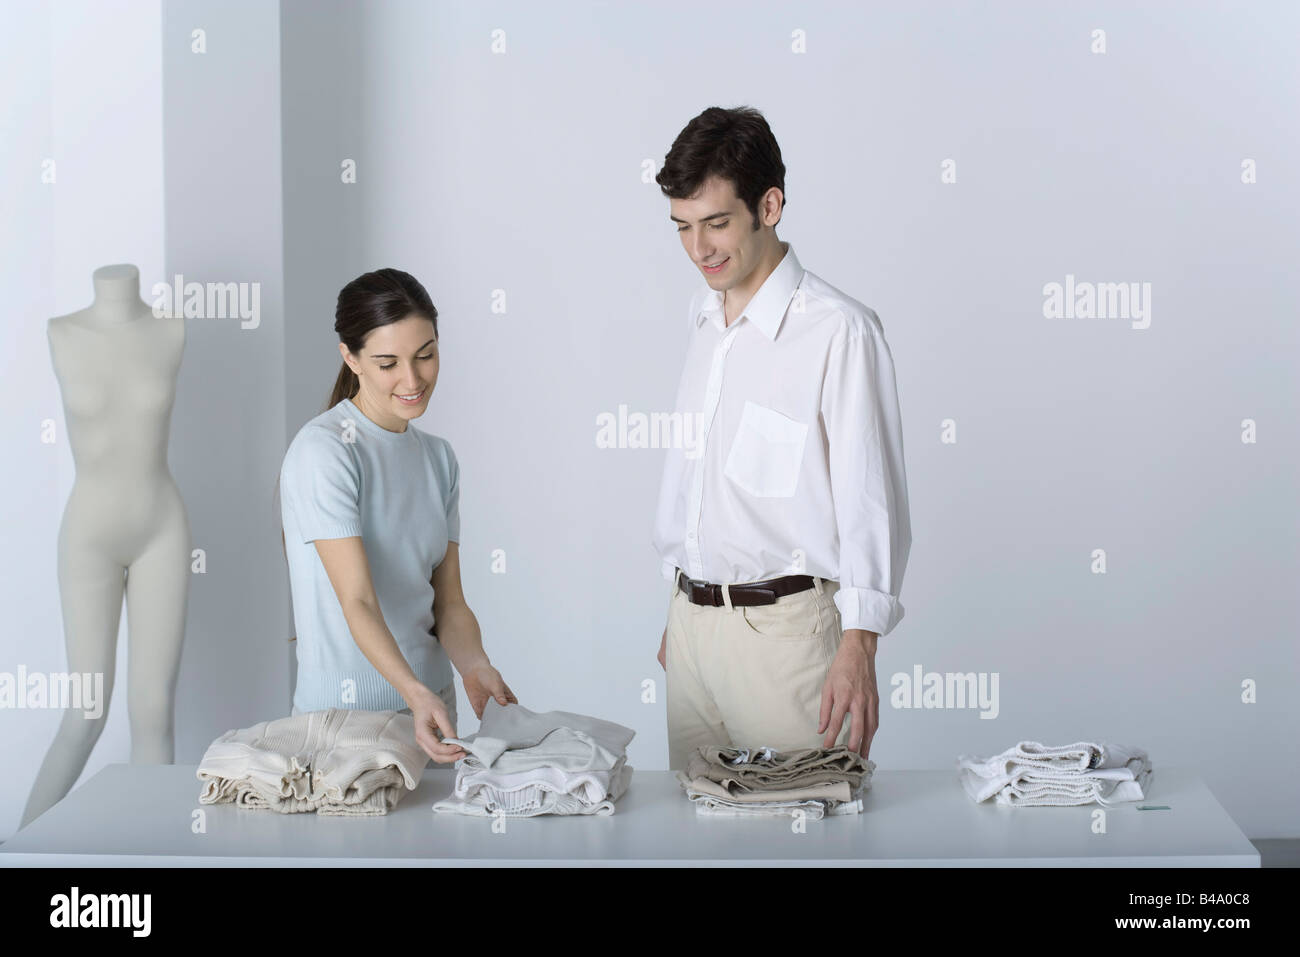 Saleswoman showing male customer a sweater, both smiling Stock Photo